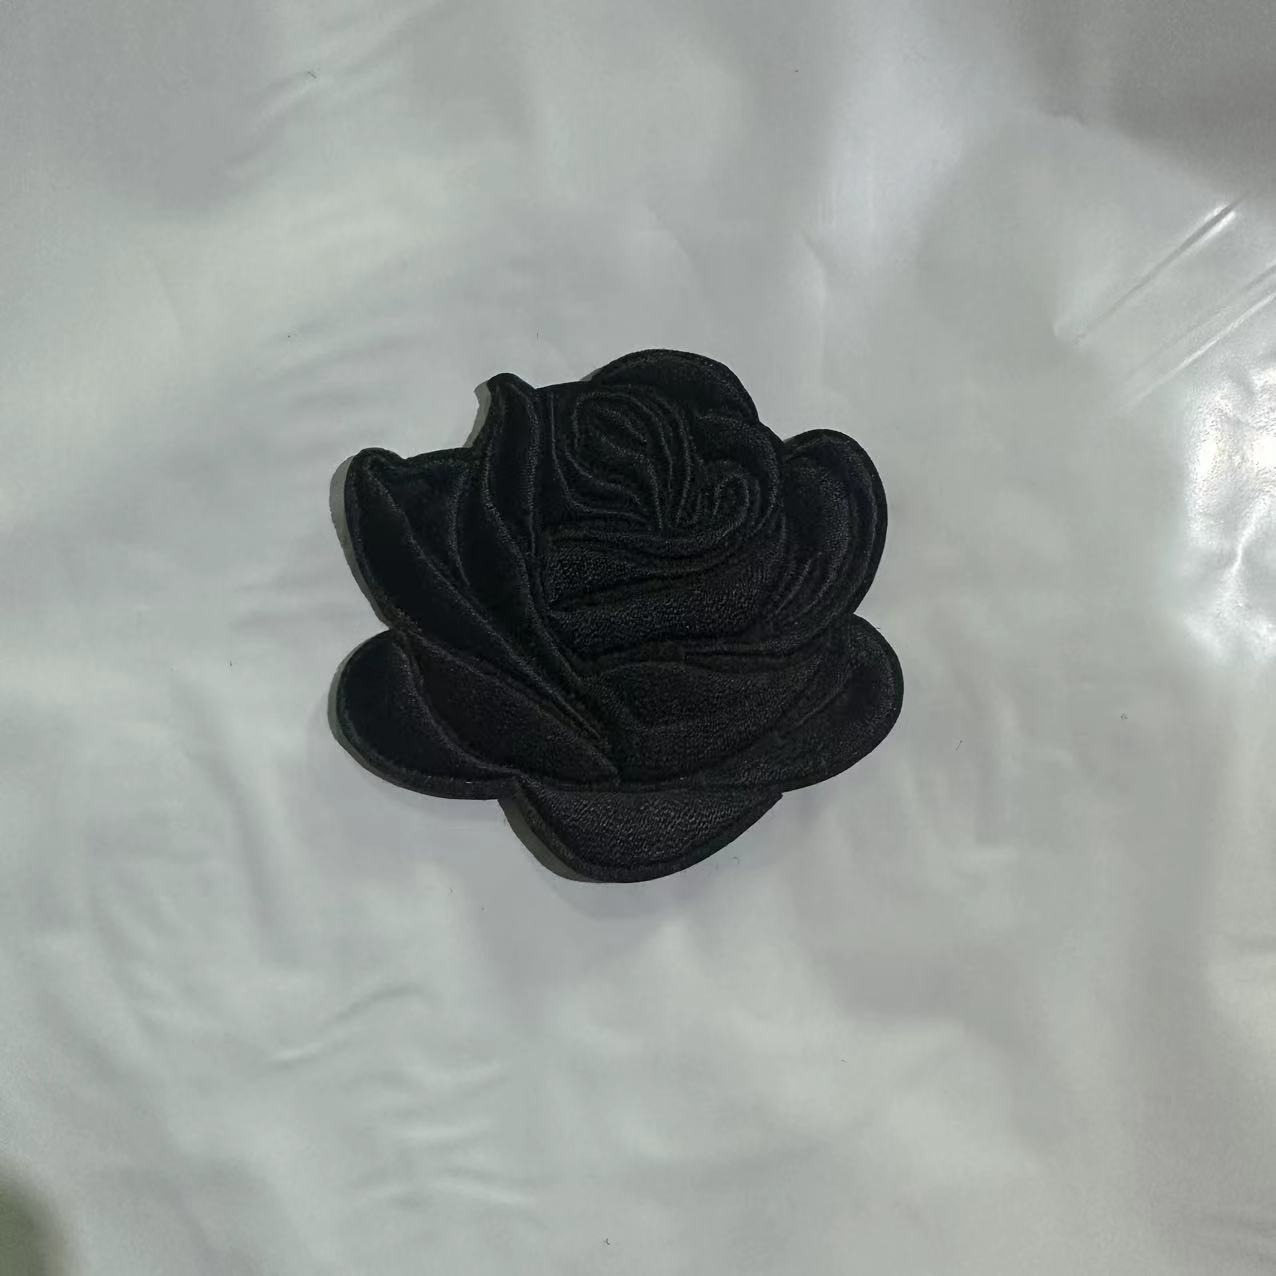 Sequin Flower patches for clothes DIY iron on black parch appliques  Embroidery applique patch ropa clothing accessory